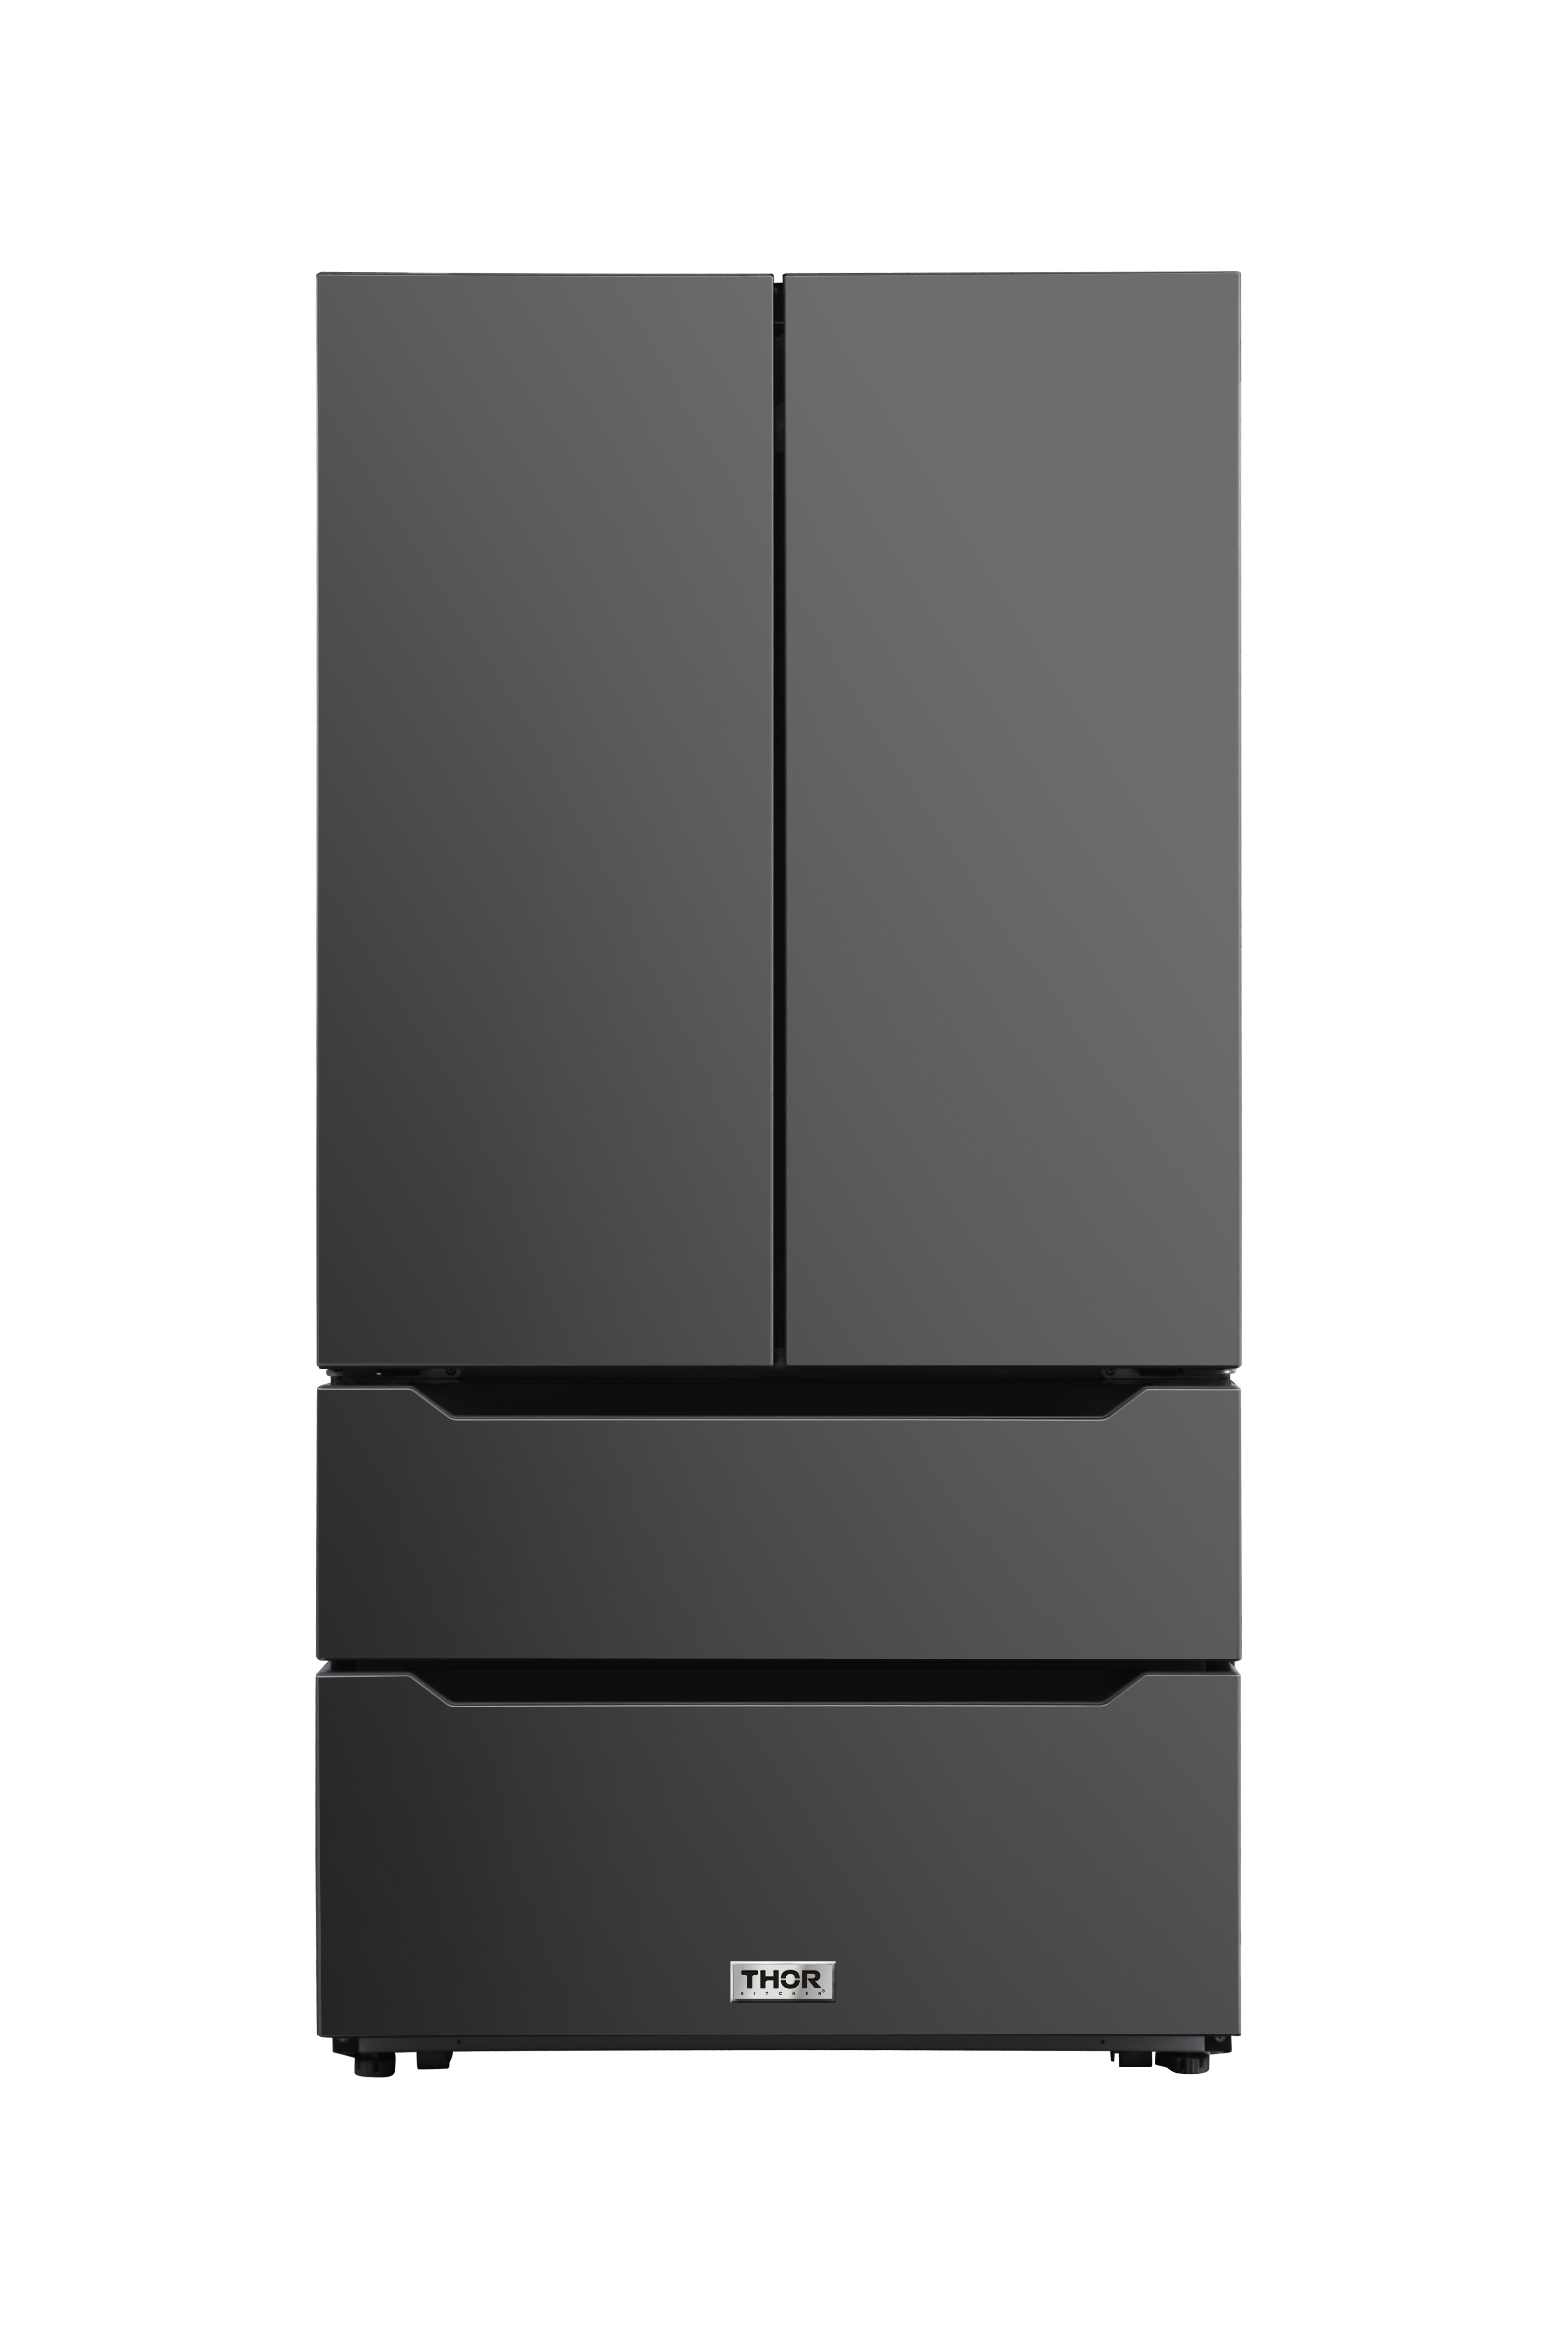 The new Recessed Handle Refrigerator from THOR Kitchen features easily accessible doors for small children while also offering a bold design for any kitchen space. Shown: Black Stainless Steel.